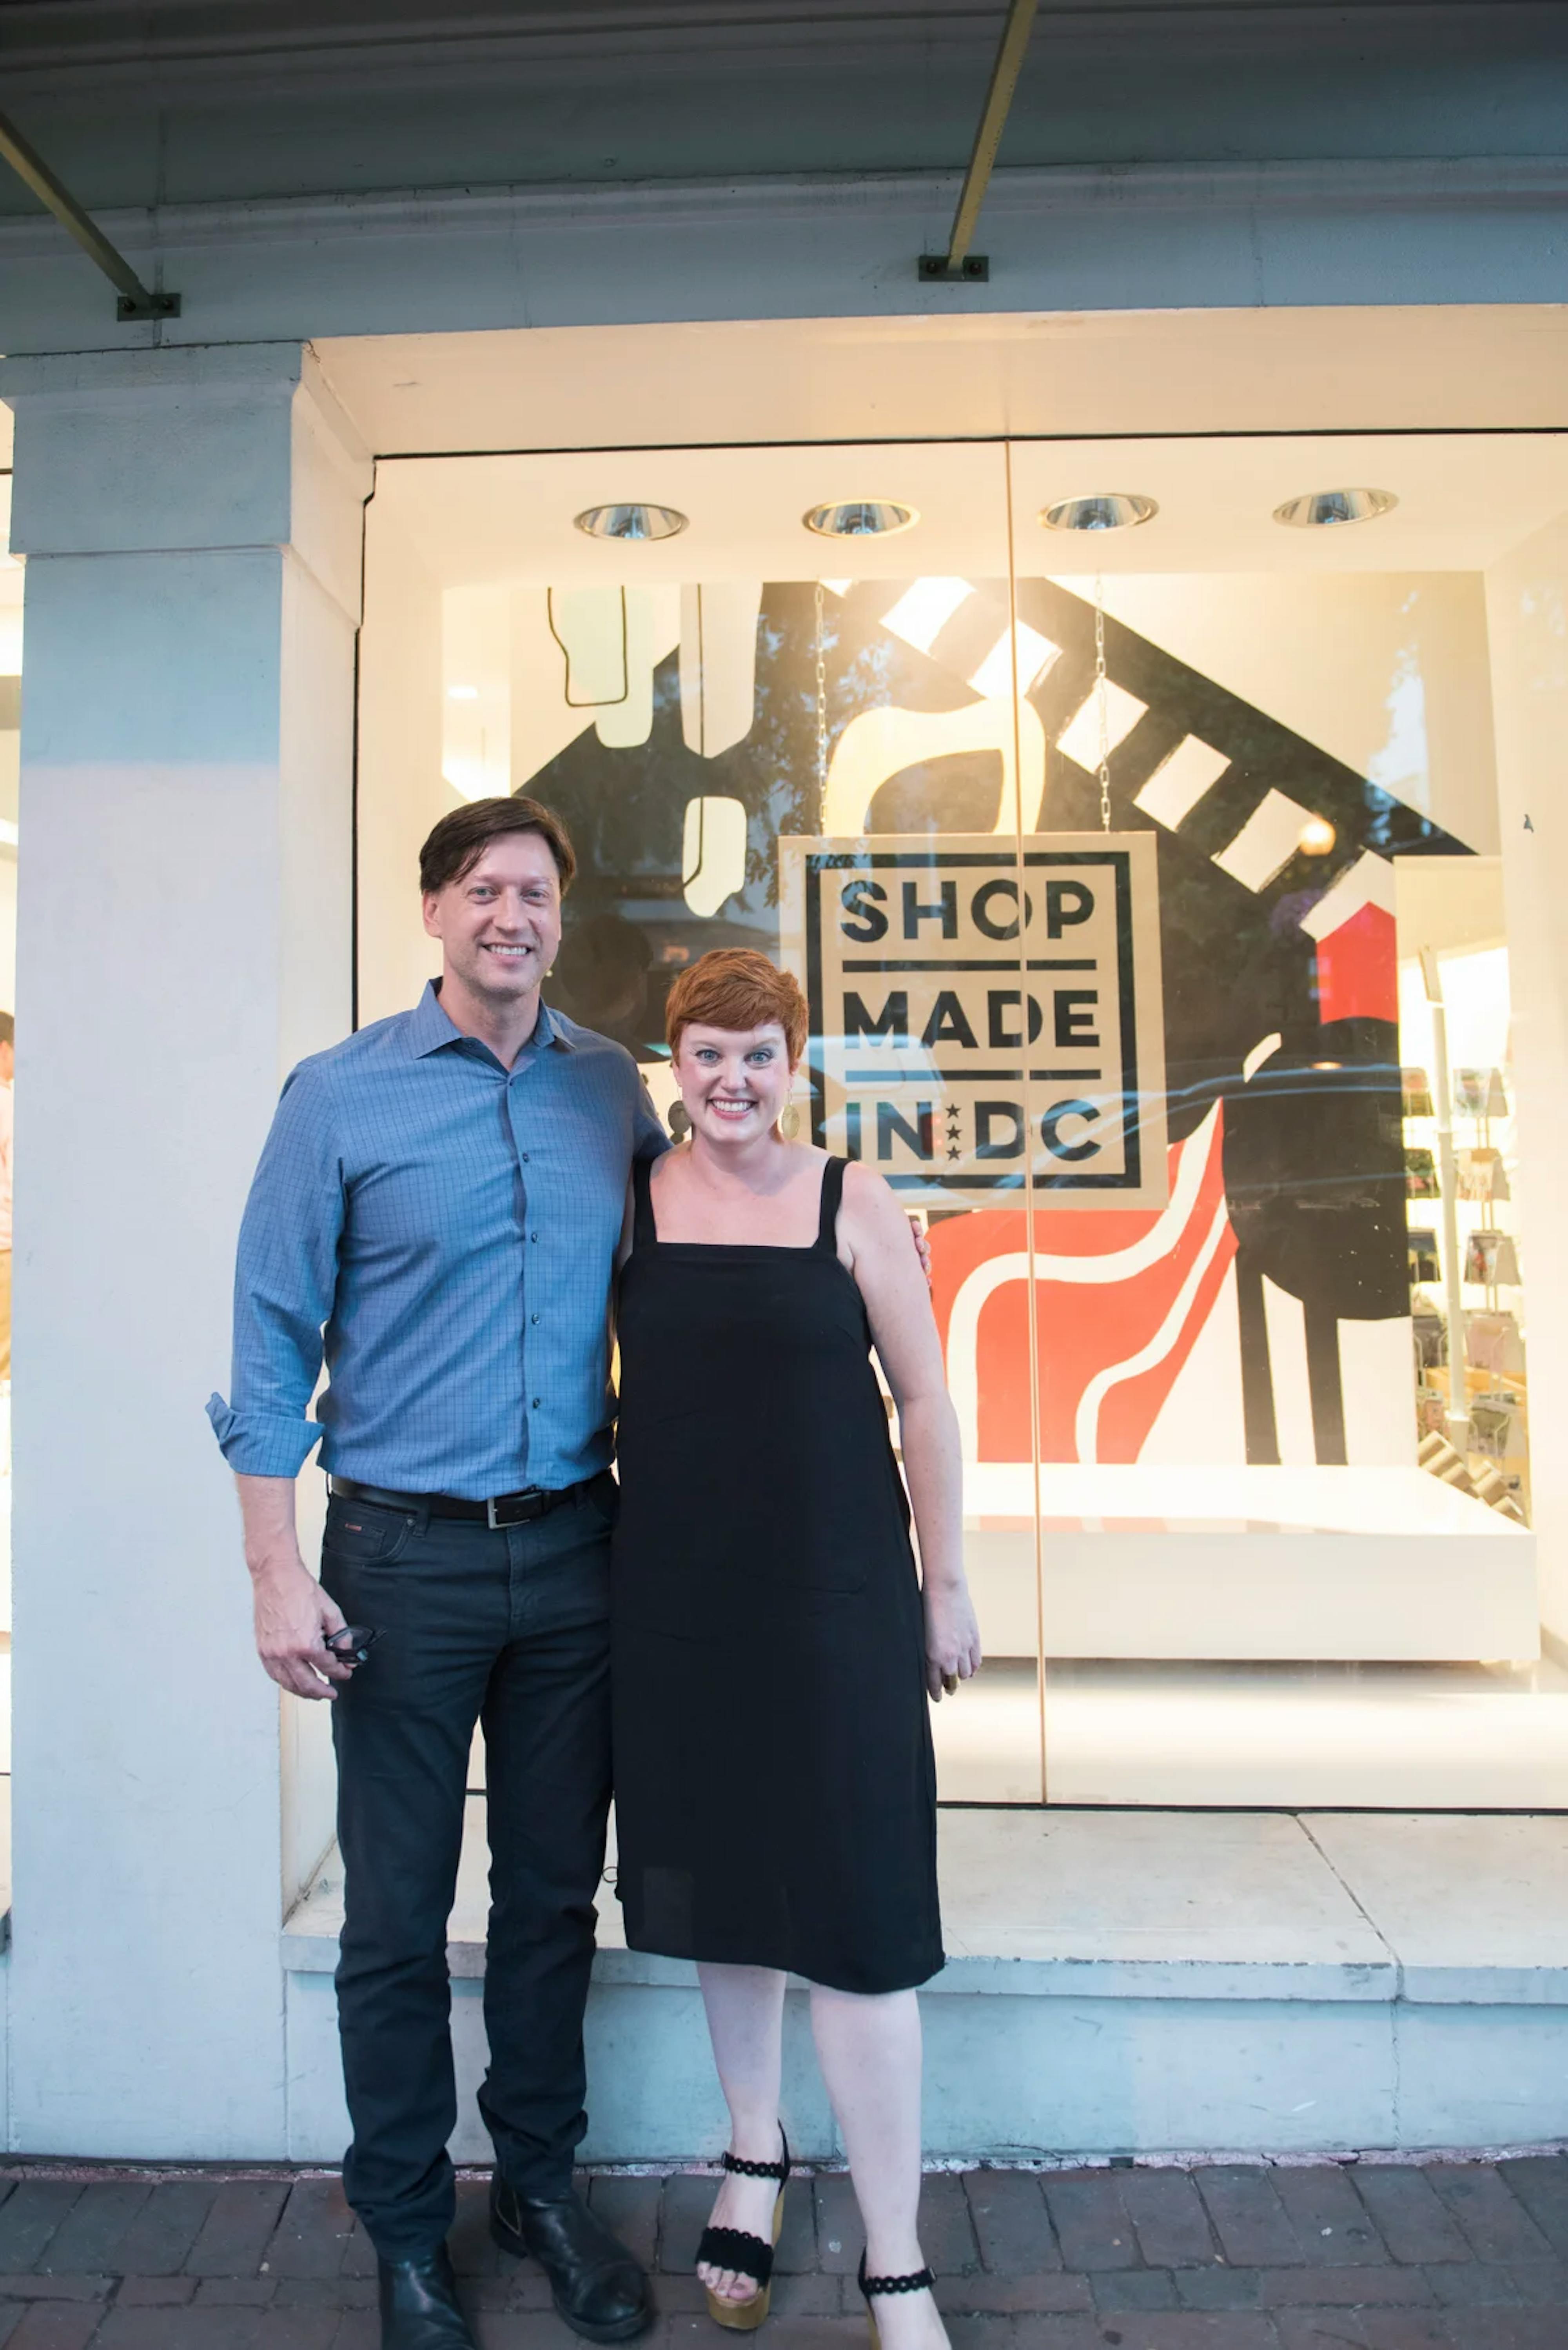 stacey and her cofounder standing in front of store